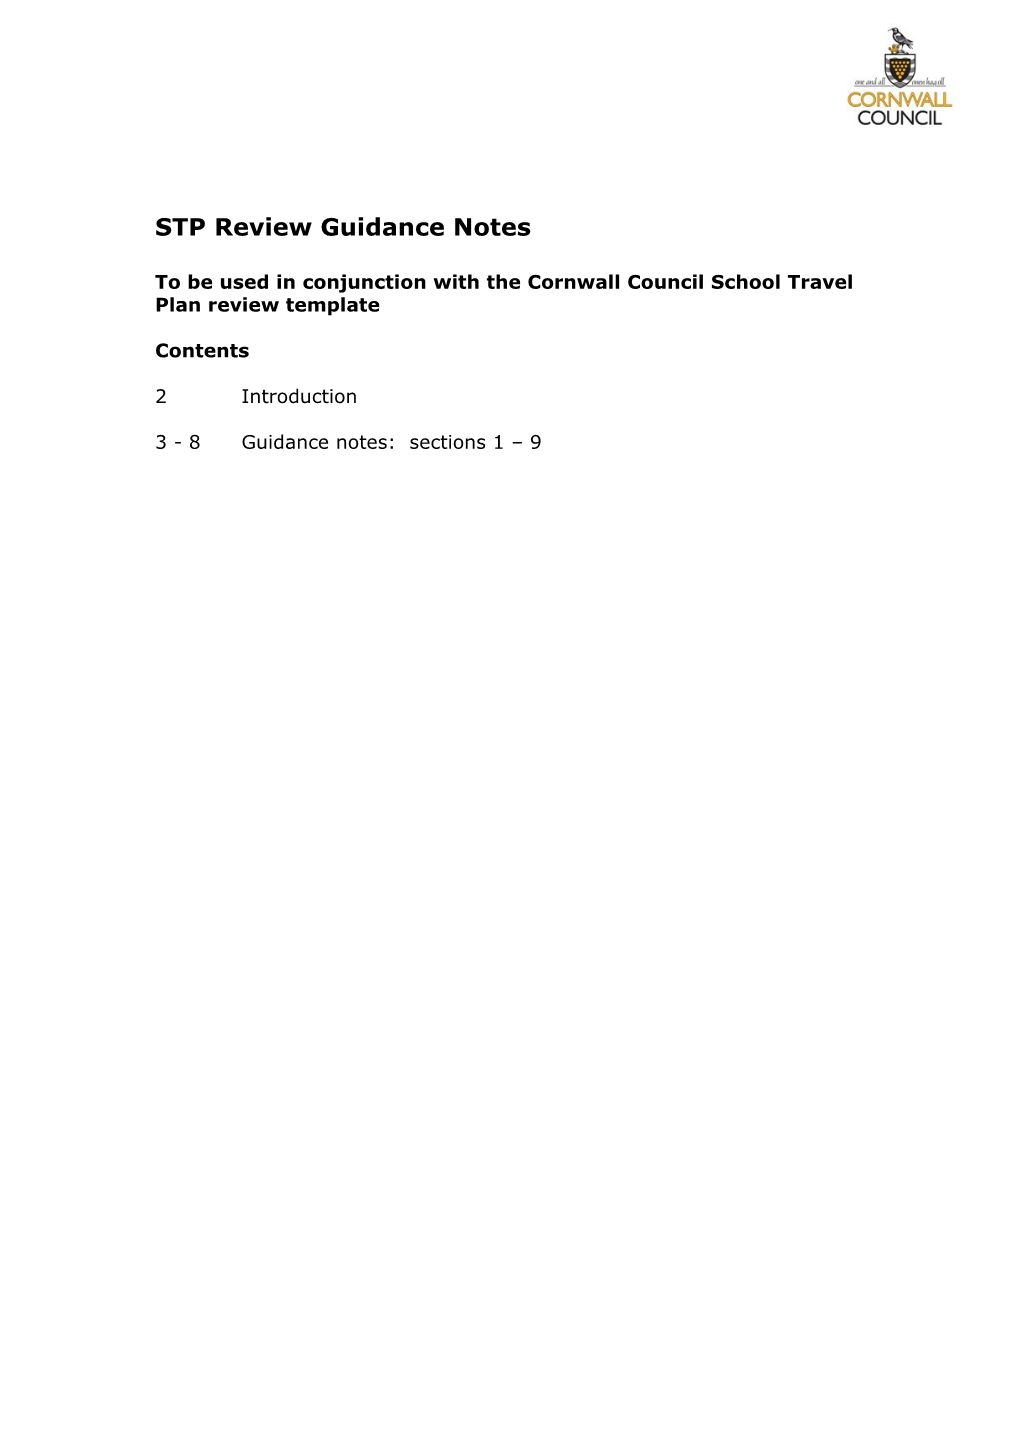 STP Review Guidance Notes